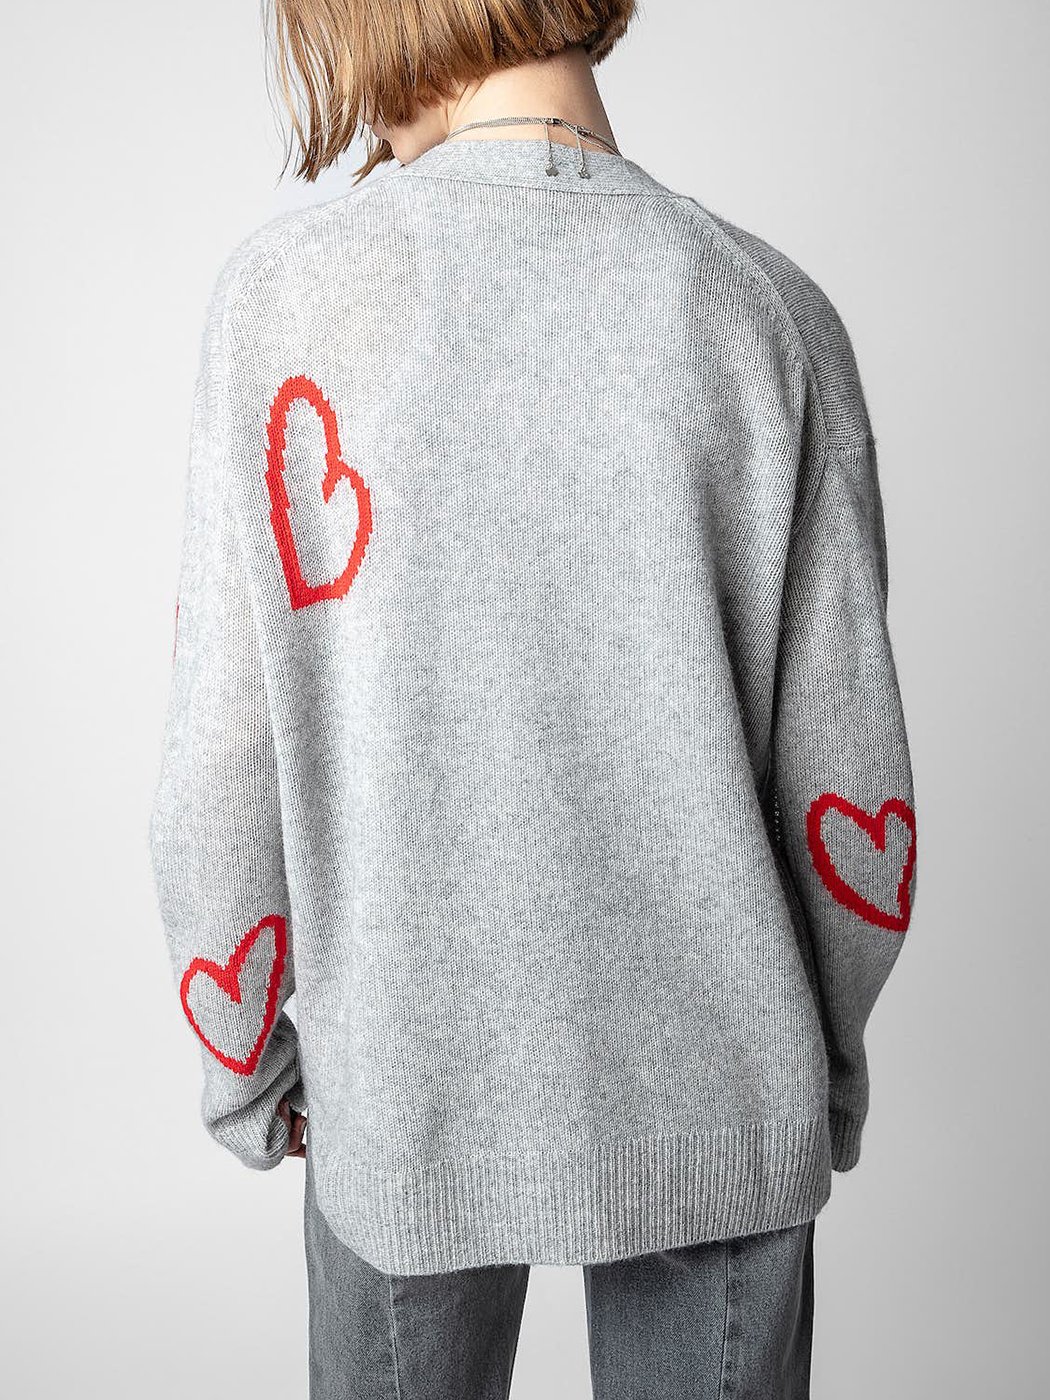 Accessorizing with a Heart Sweater: Jewelry and Shoe Pairings插图